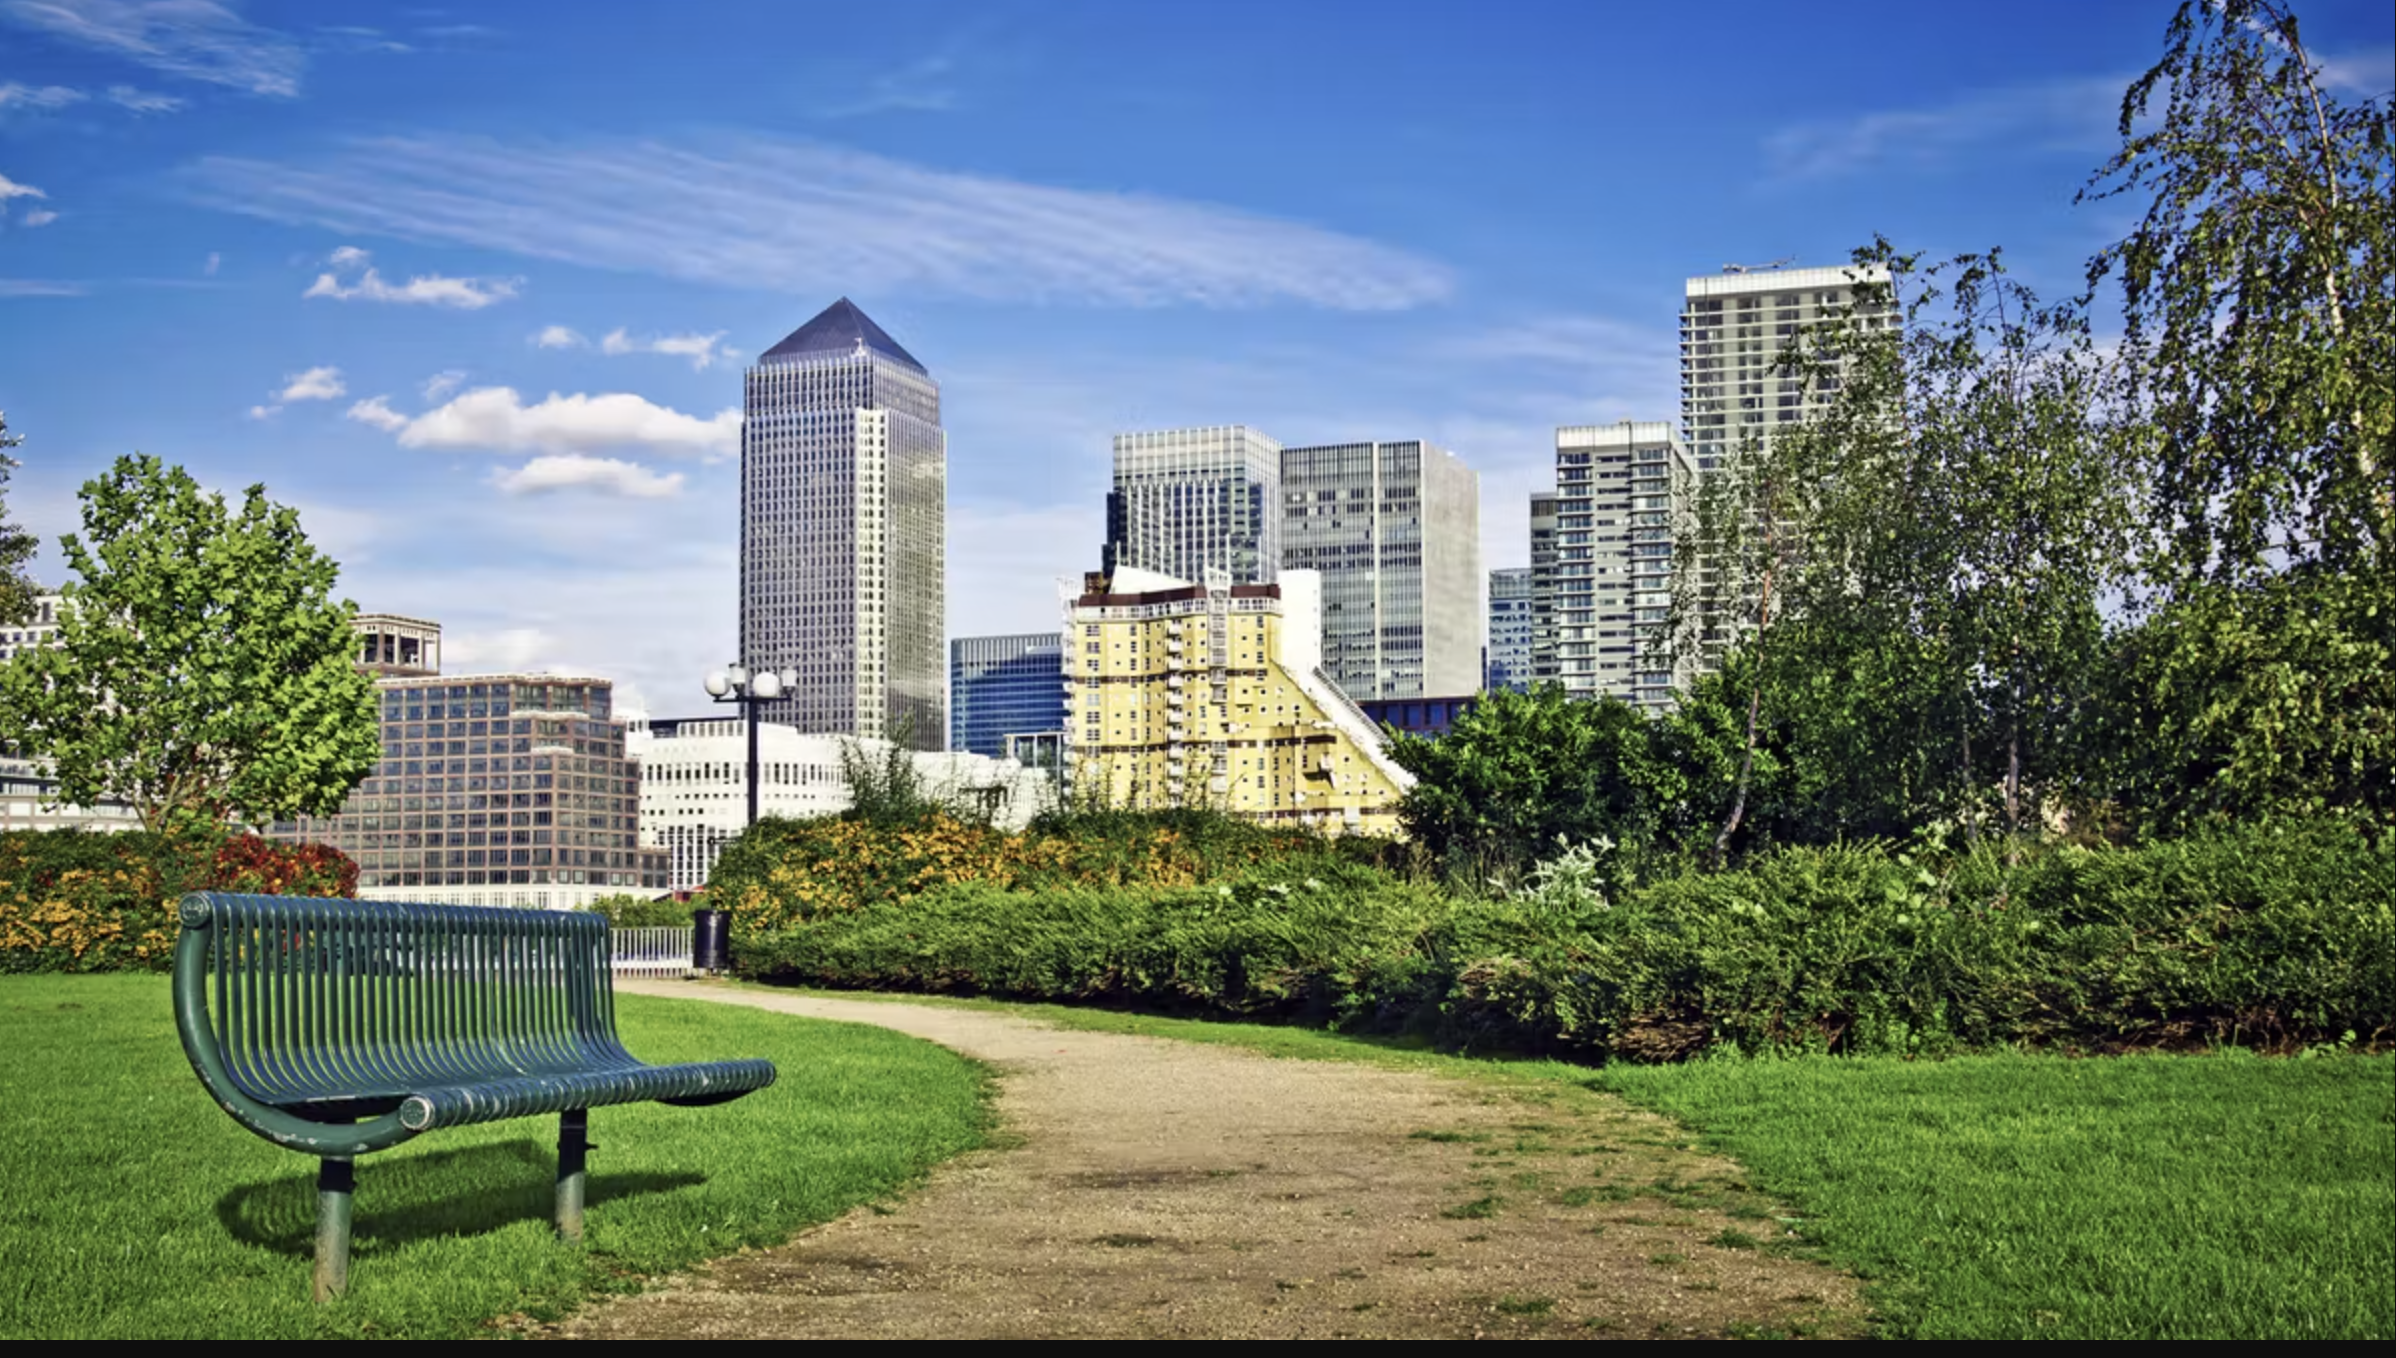 Wealthy areas of London have better green space provision than the national average.